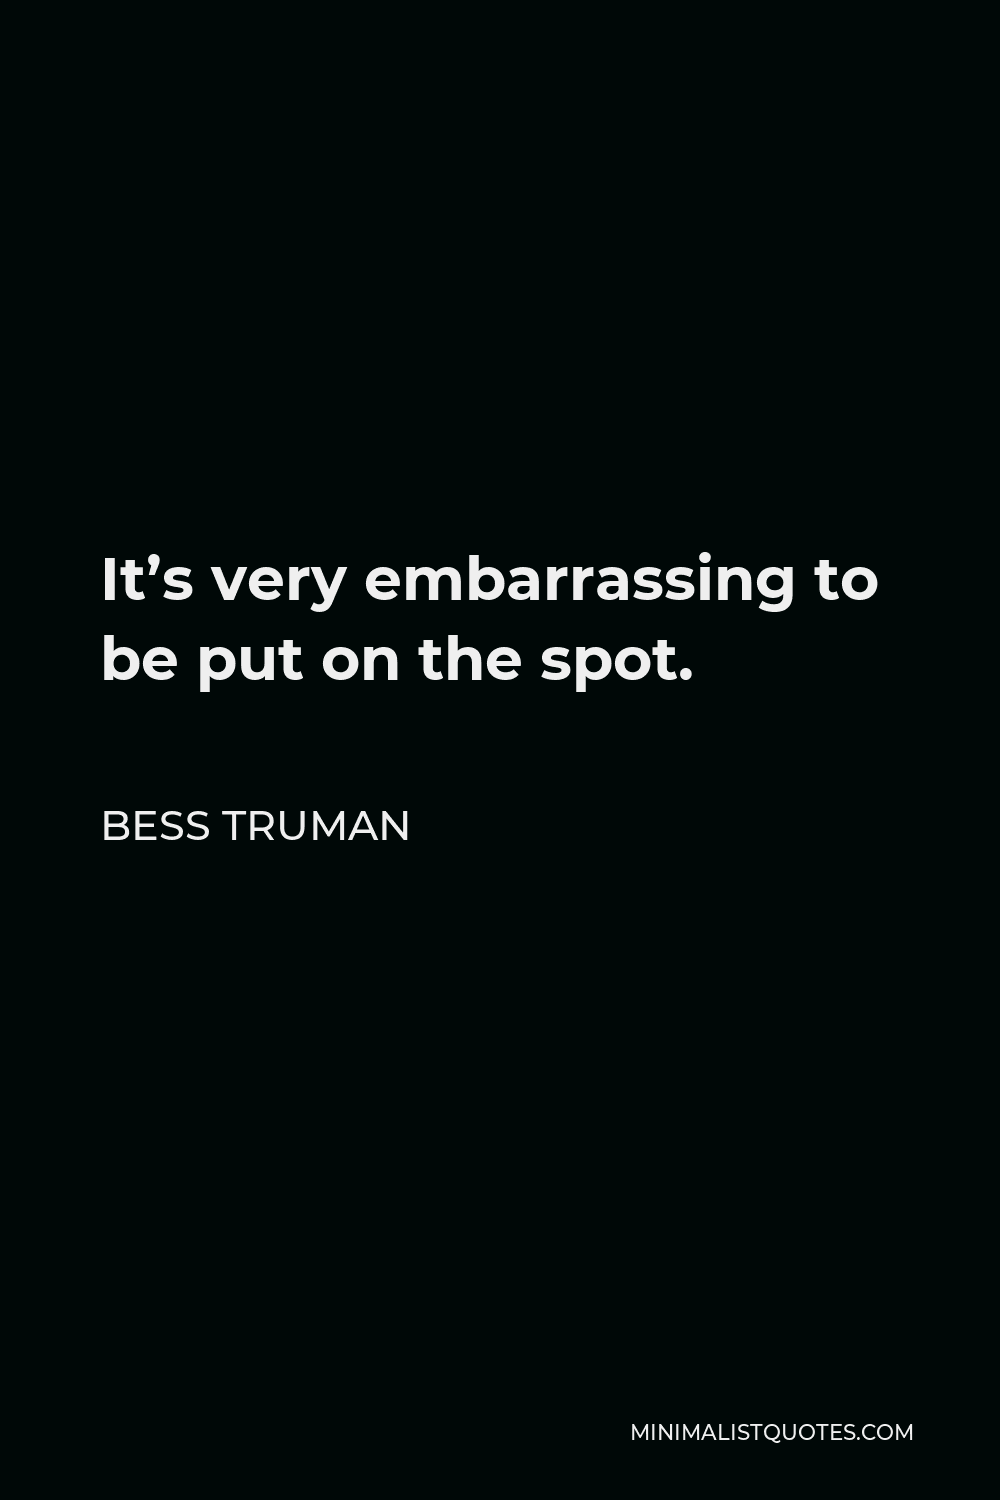 Bess Truman Quote - It’s very embarrassing to be put on the spot.